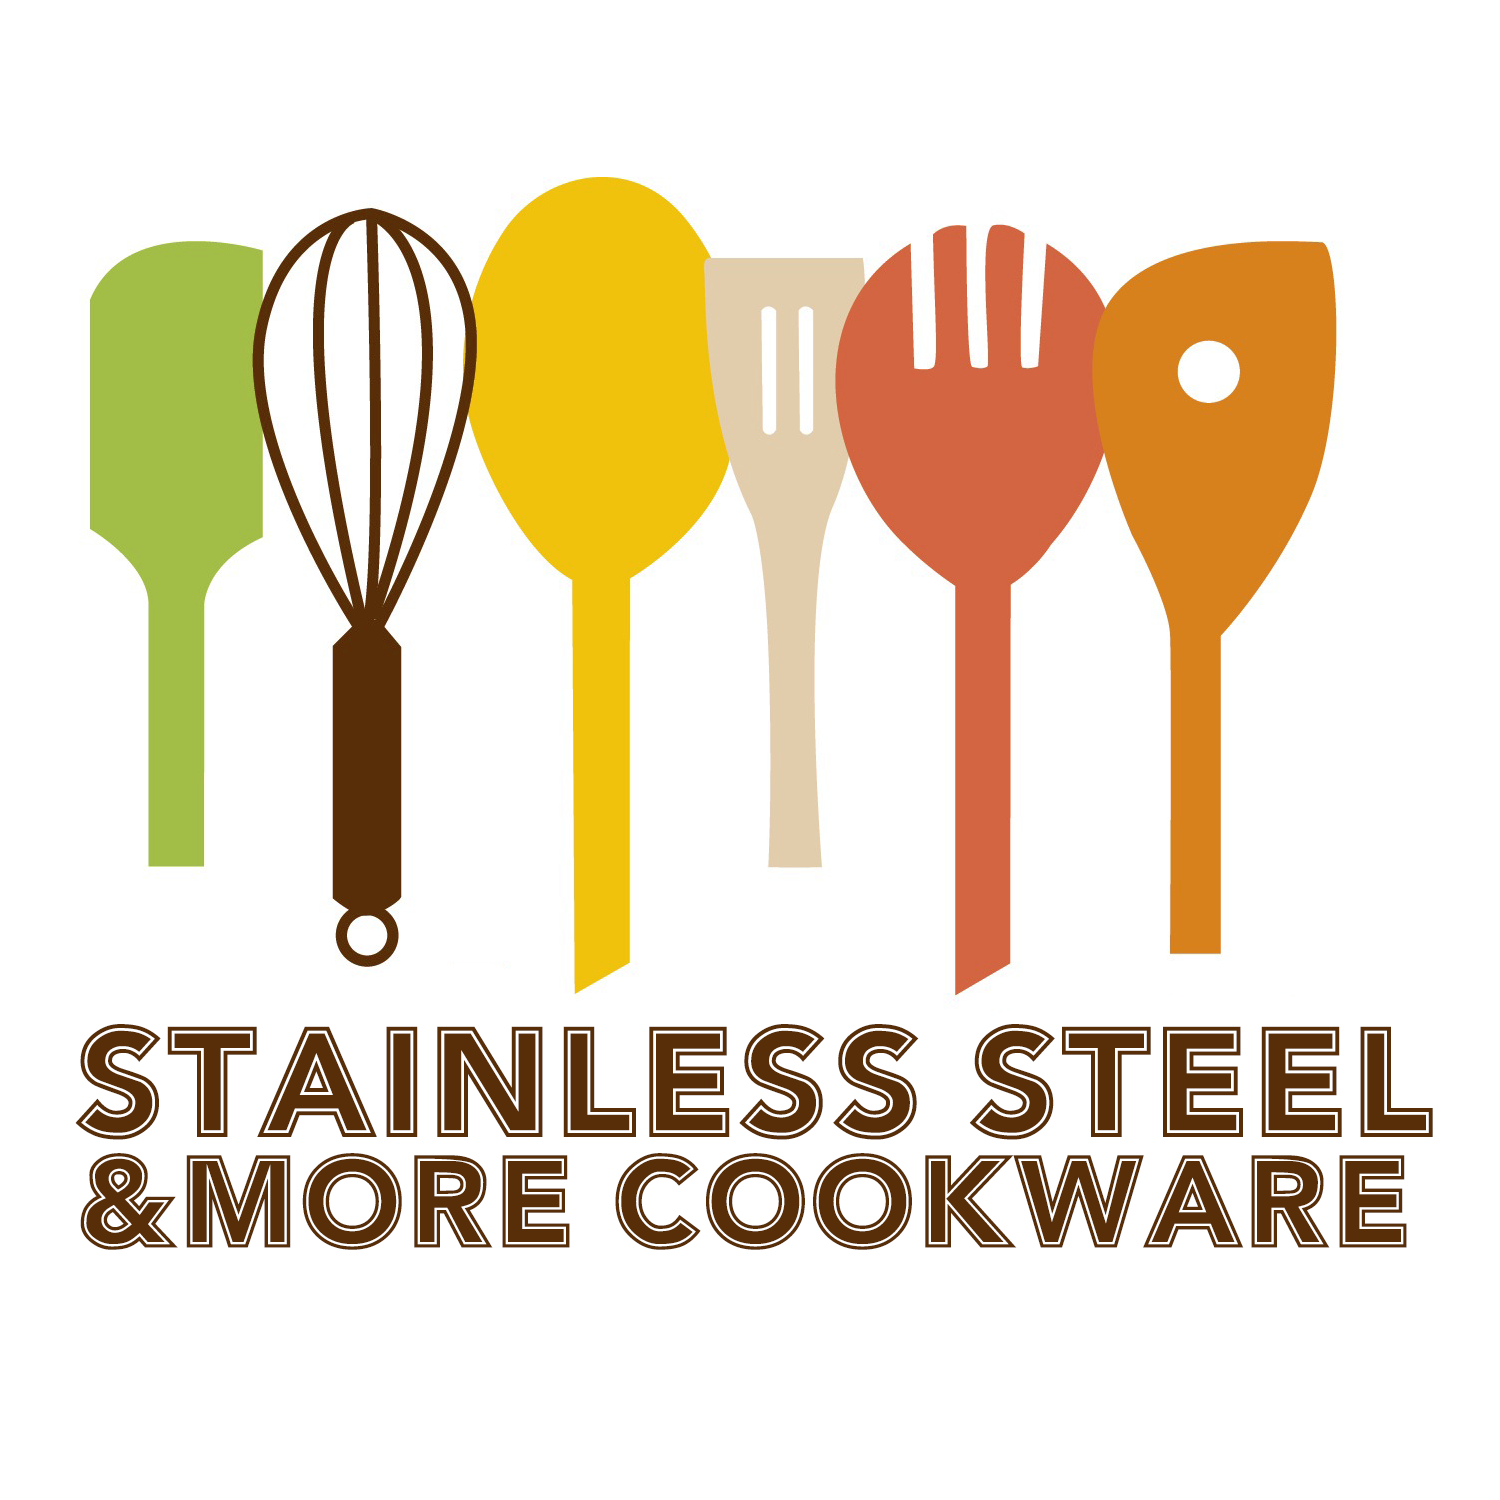 Stainless Steel And More Cookware caters to anyone who spends a lot of time in the kitchen and prefers to use quality stainless steel cookware products.